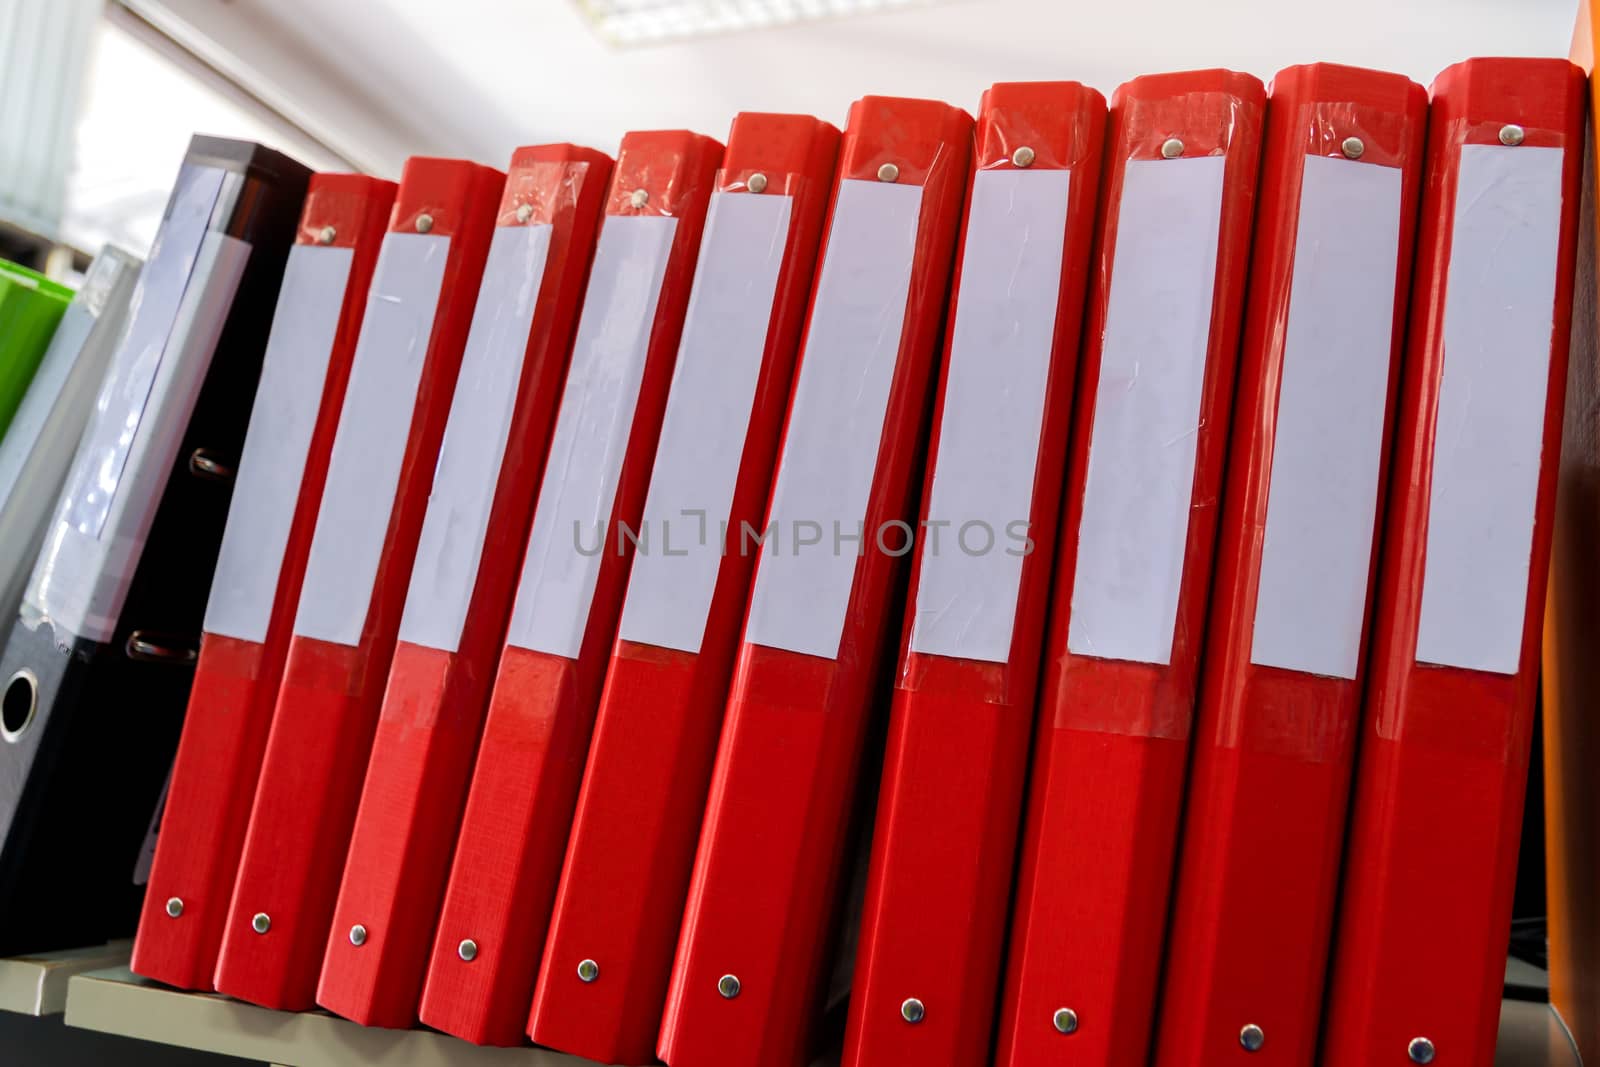 Documents Binder Paper with blank label,Red Files folder office by smolaw11